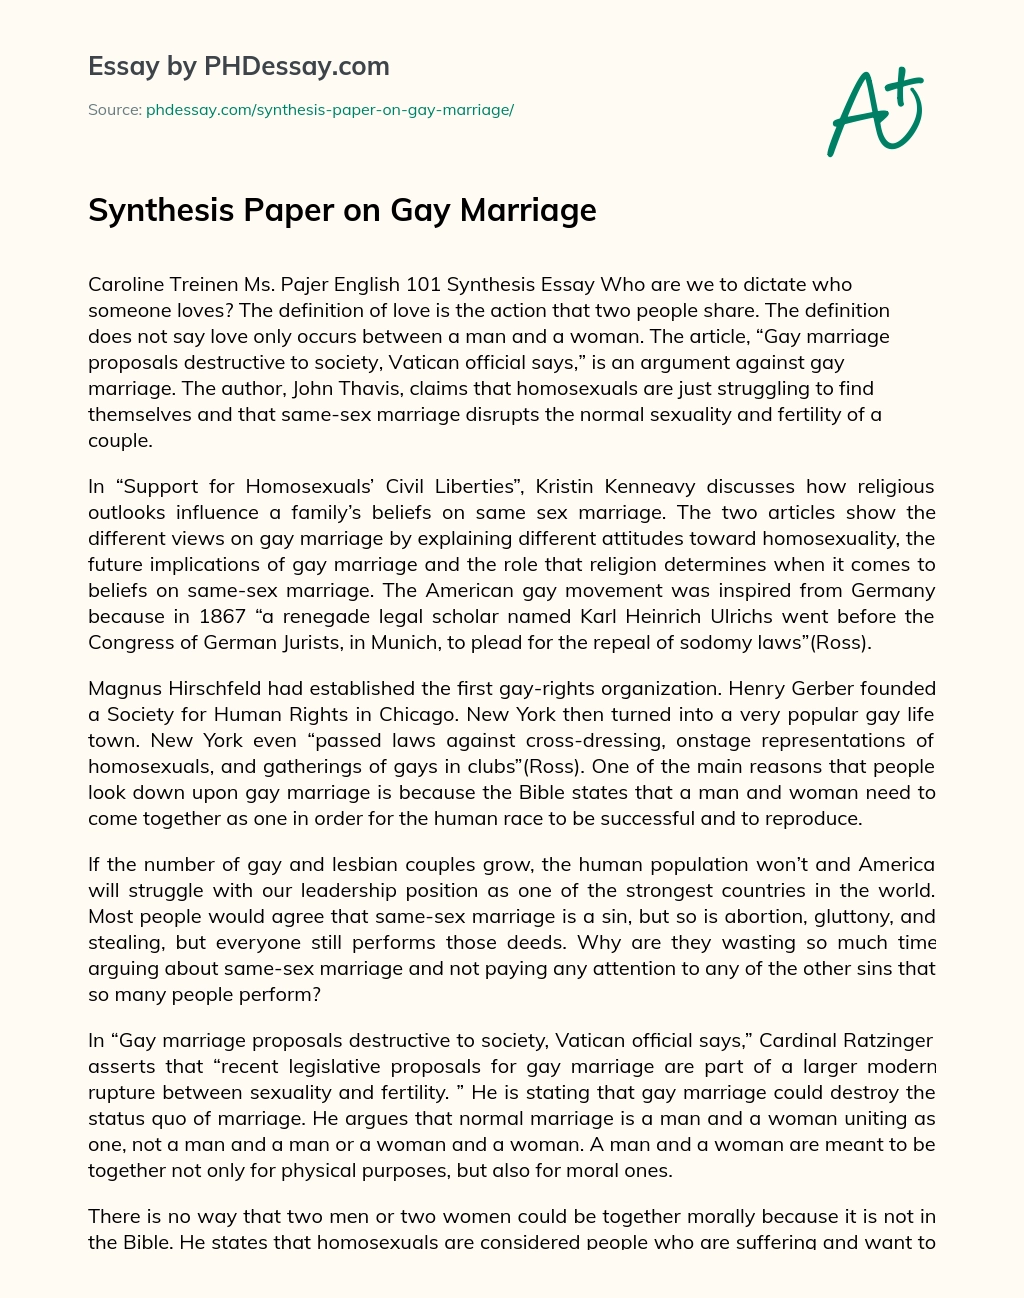 Synthesis Paper on Gay Marriage essay